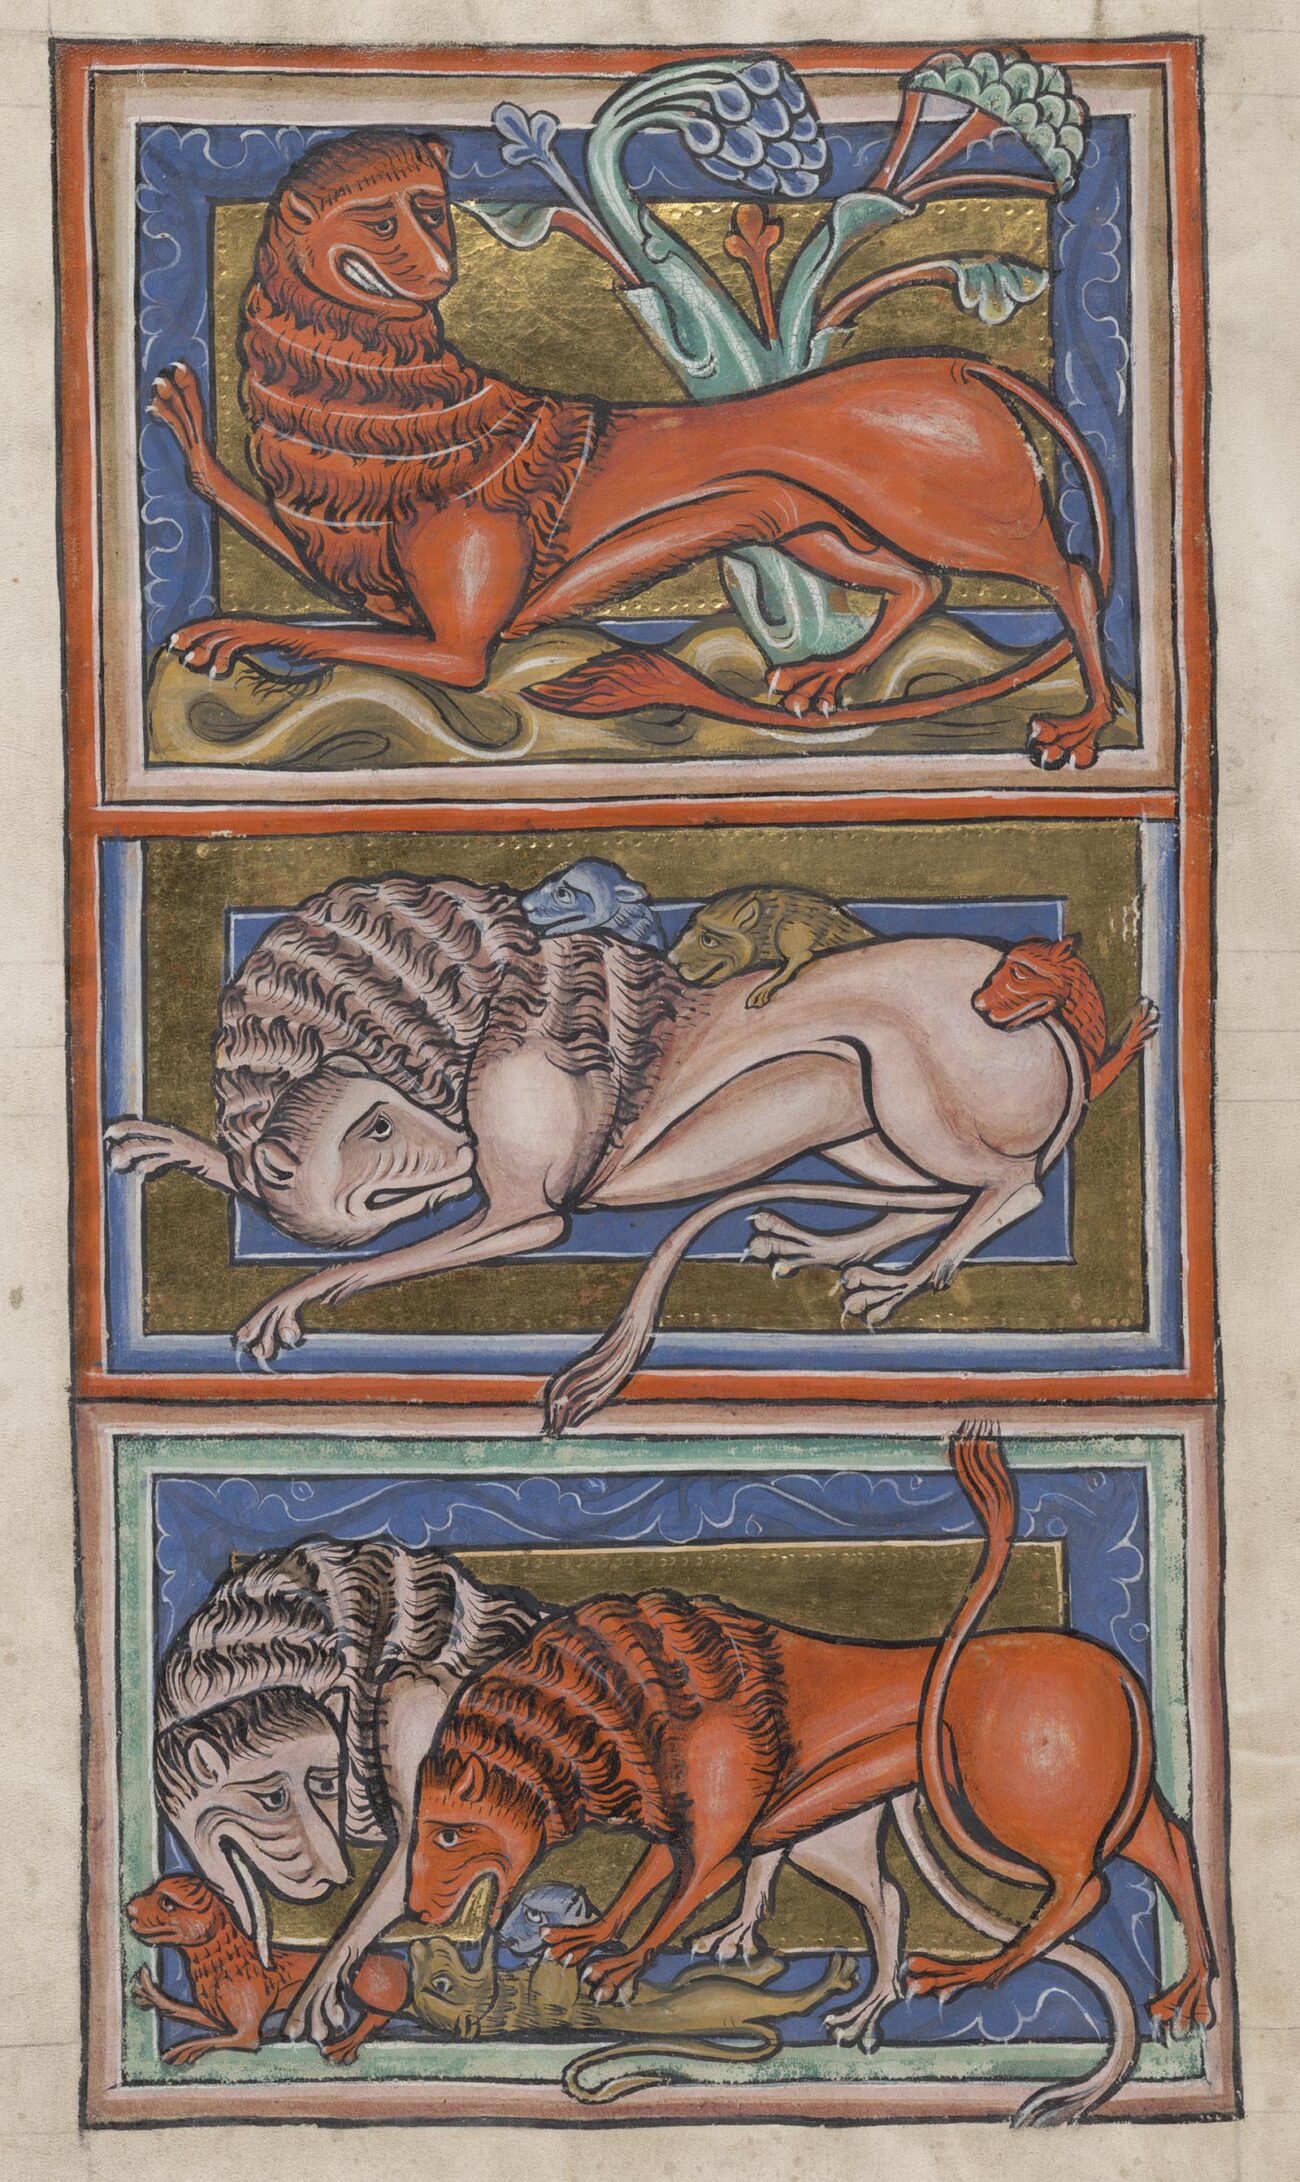 Lion (detail) in a bestiary, about 1225–50, unknown illuminator, made in England, parchment, 11 5/8 × 7 1/2 inches (The Bodleian Libraries, University of Oxford, Ms. Bodl. 764, fol. 2v)